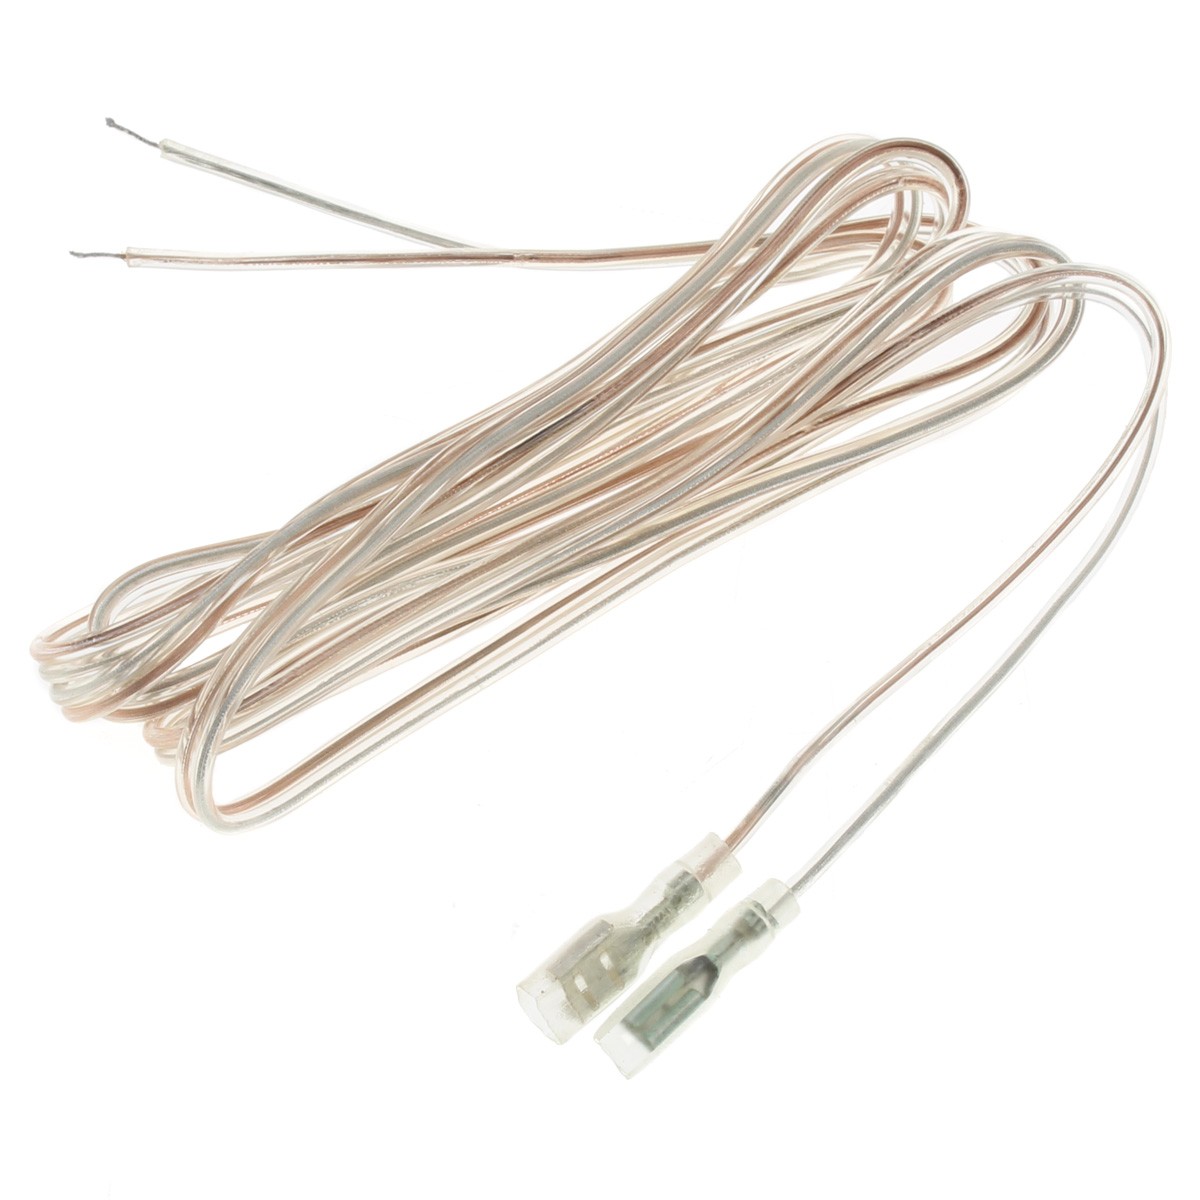 [GRADE S] Cables for Small Loudspeakers Lugs to Bare Wire Tinned Copper 1.45m (Set x4)